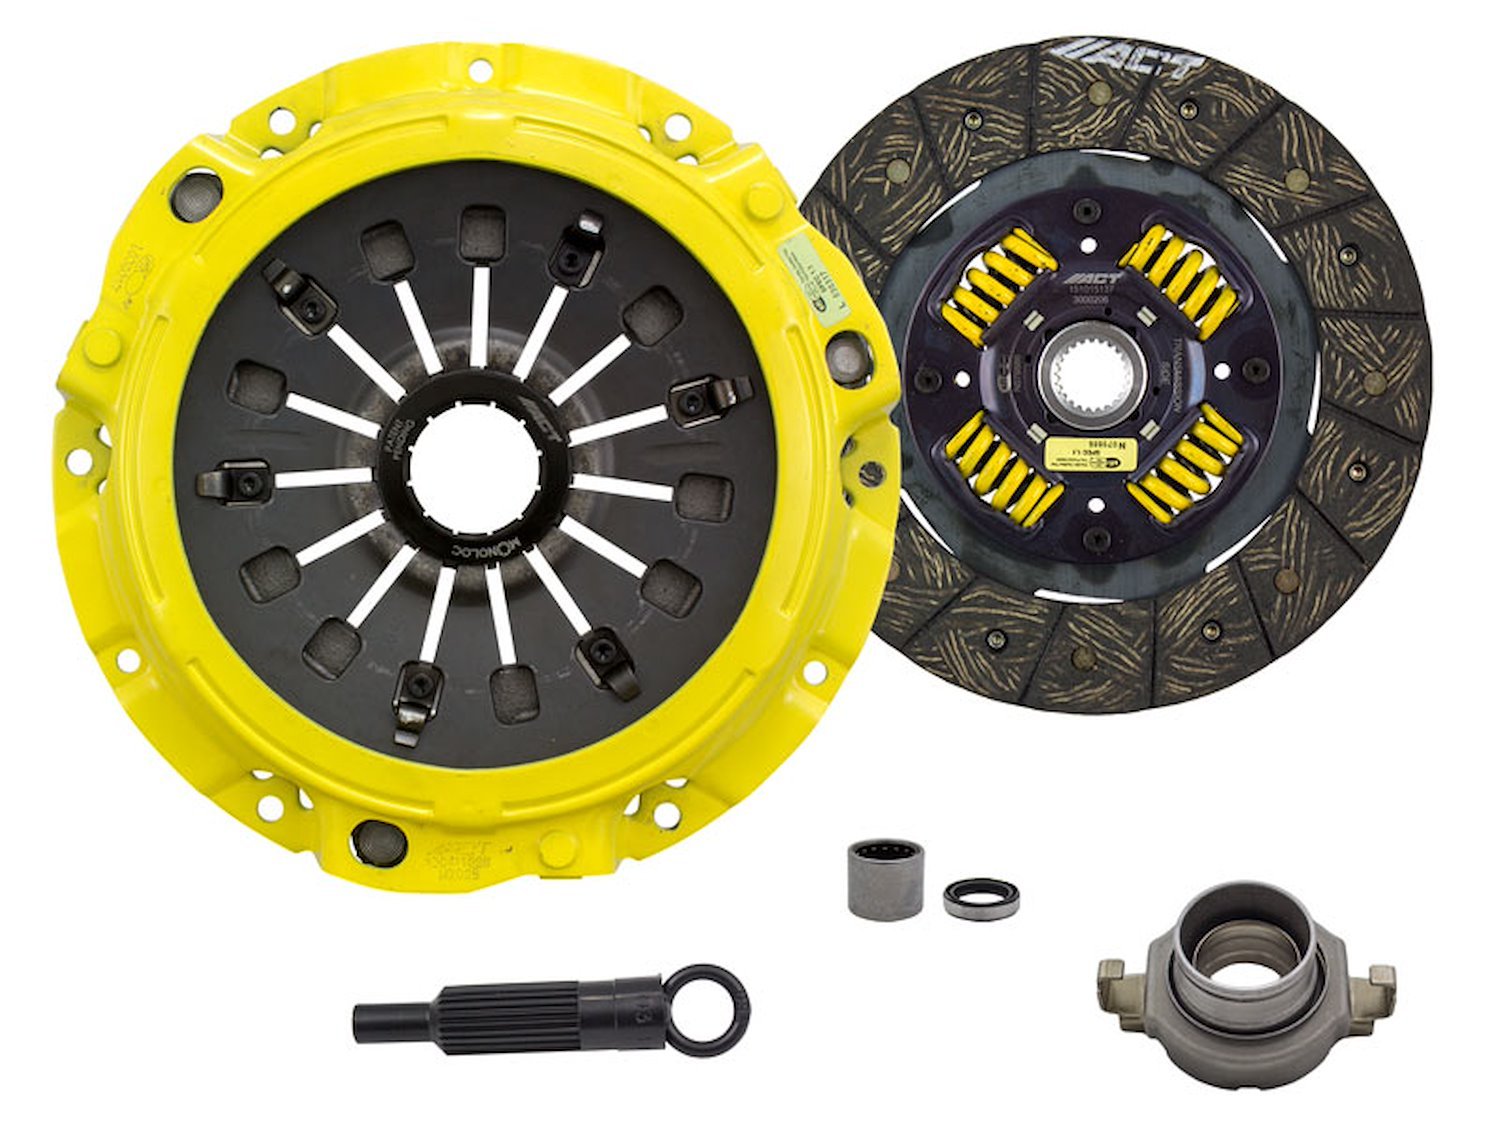 HD-M/Performance Street Sprung Transmission Clutch Kit Fits Select Ford/Lincoln/Mercury/Mazda